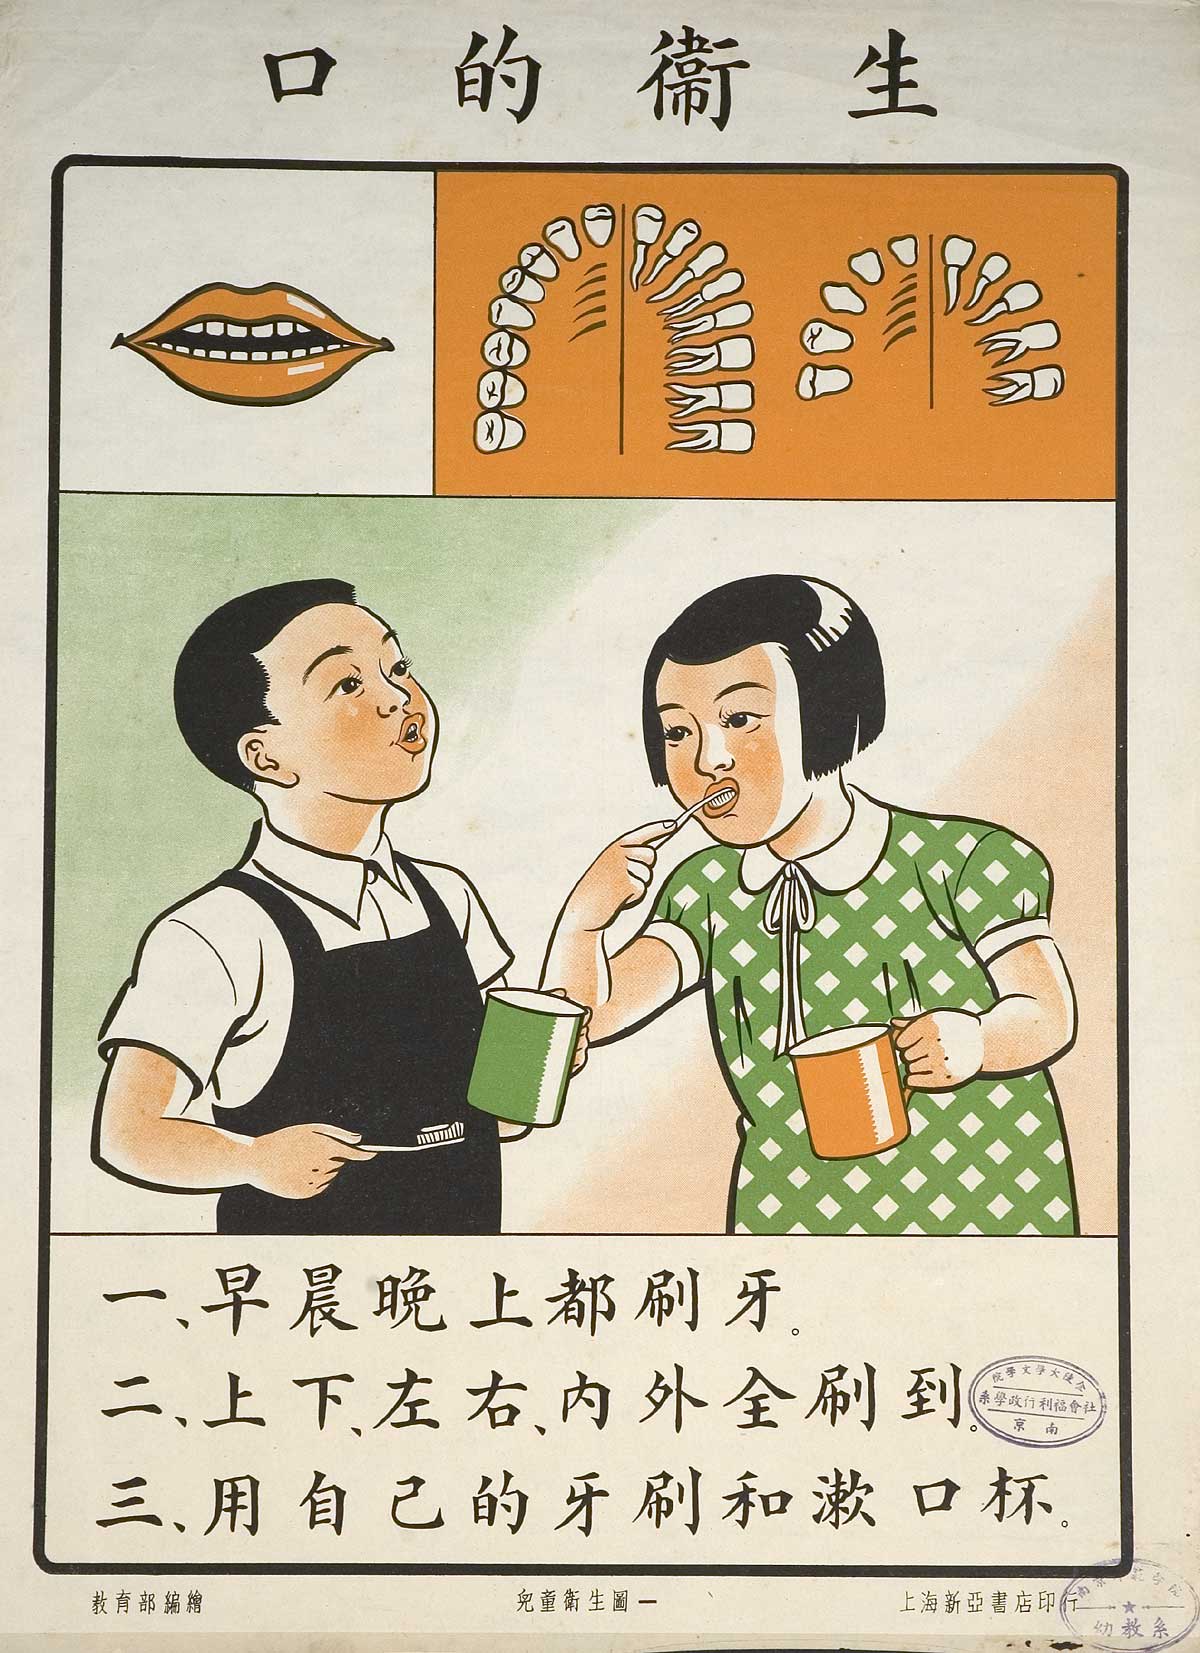 Chinese Public Health Posters: Hygiene Education for Children